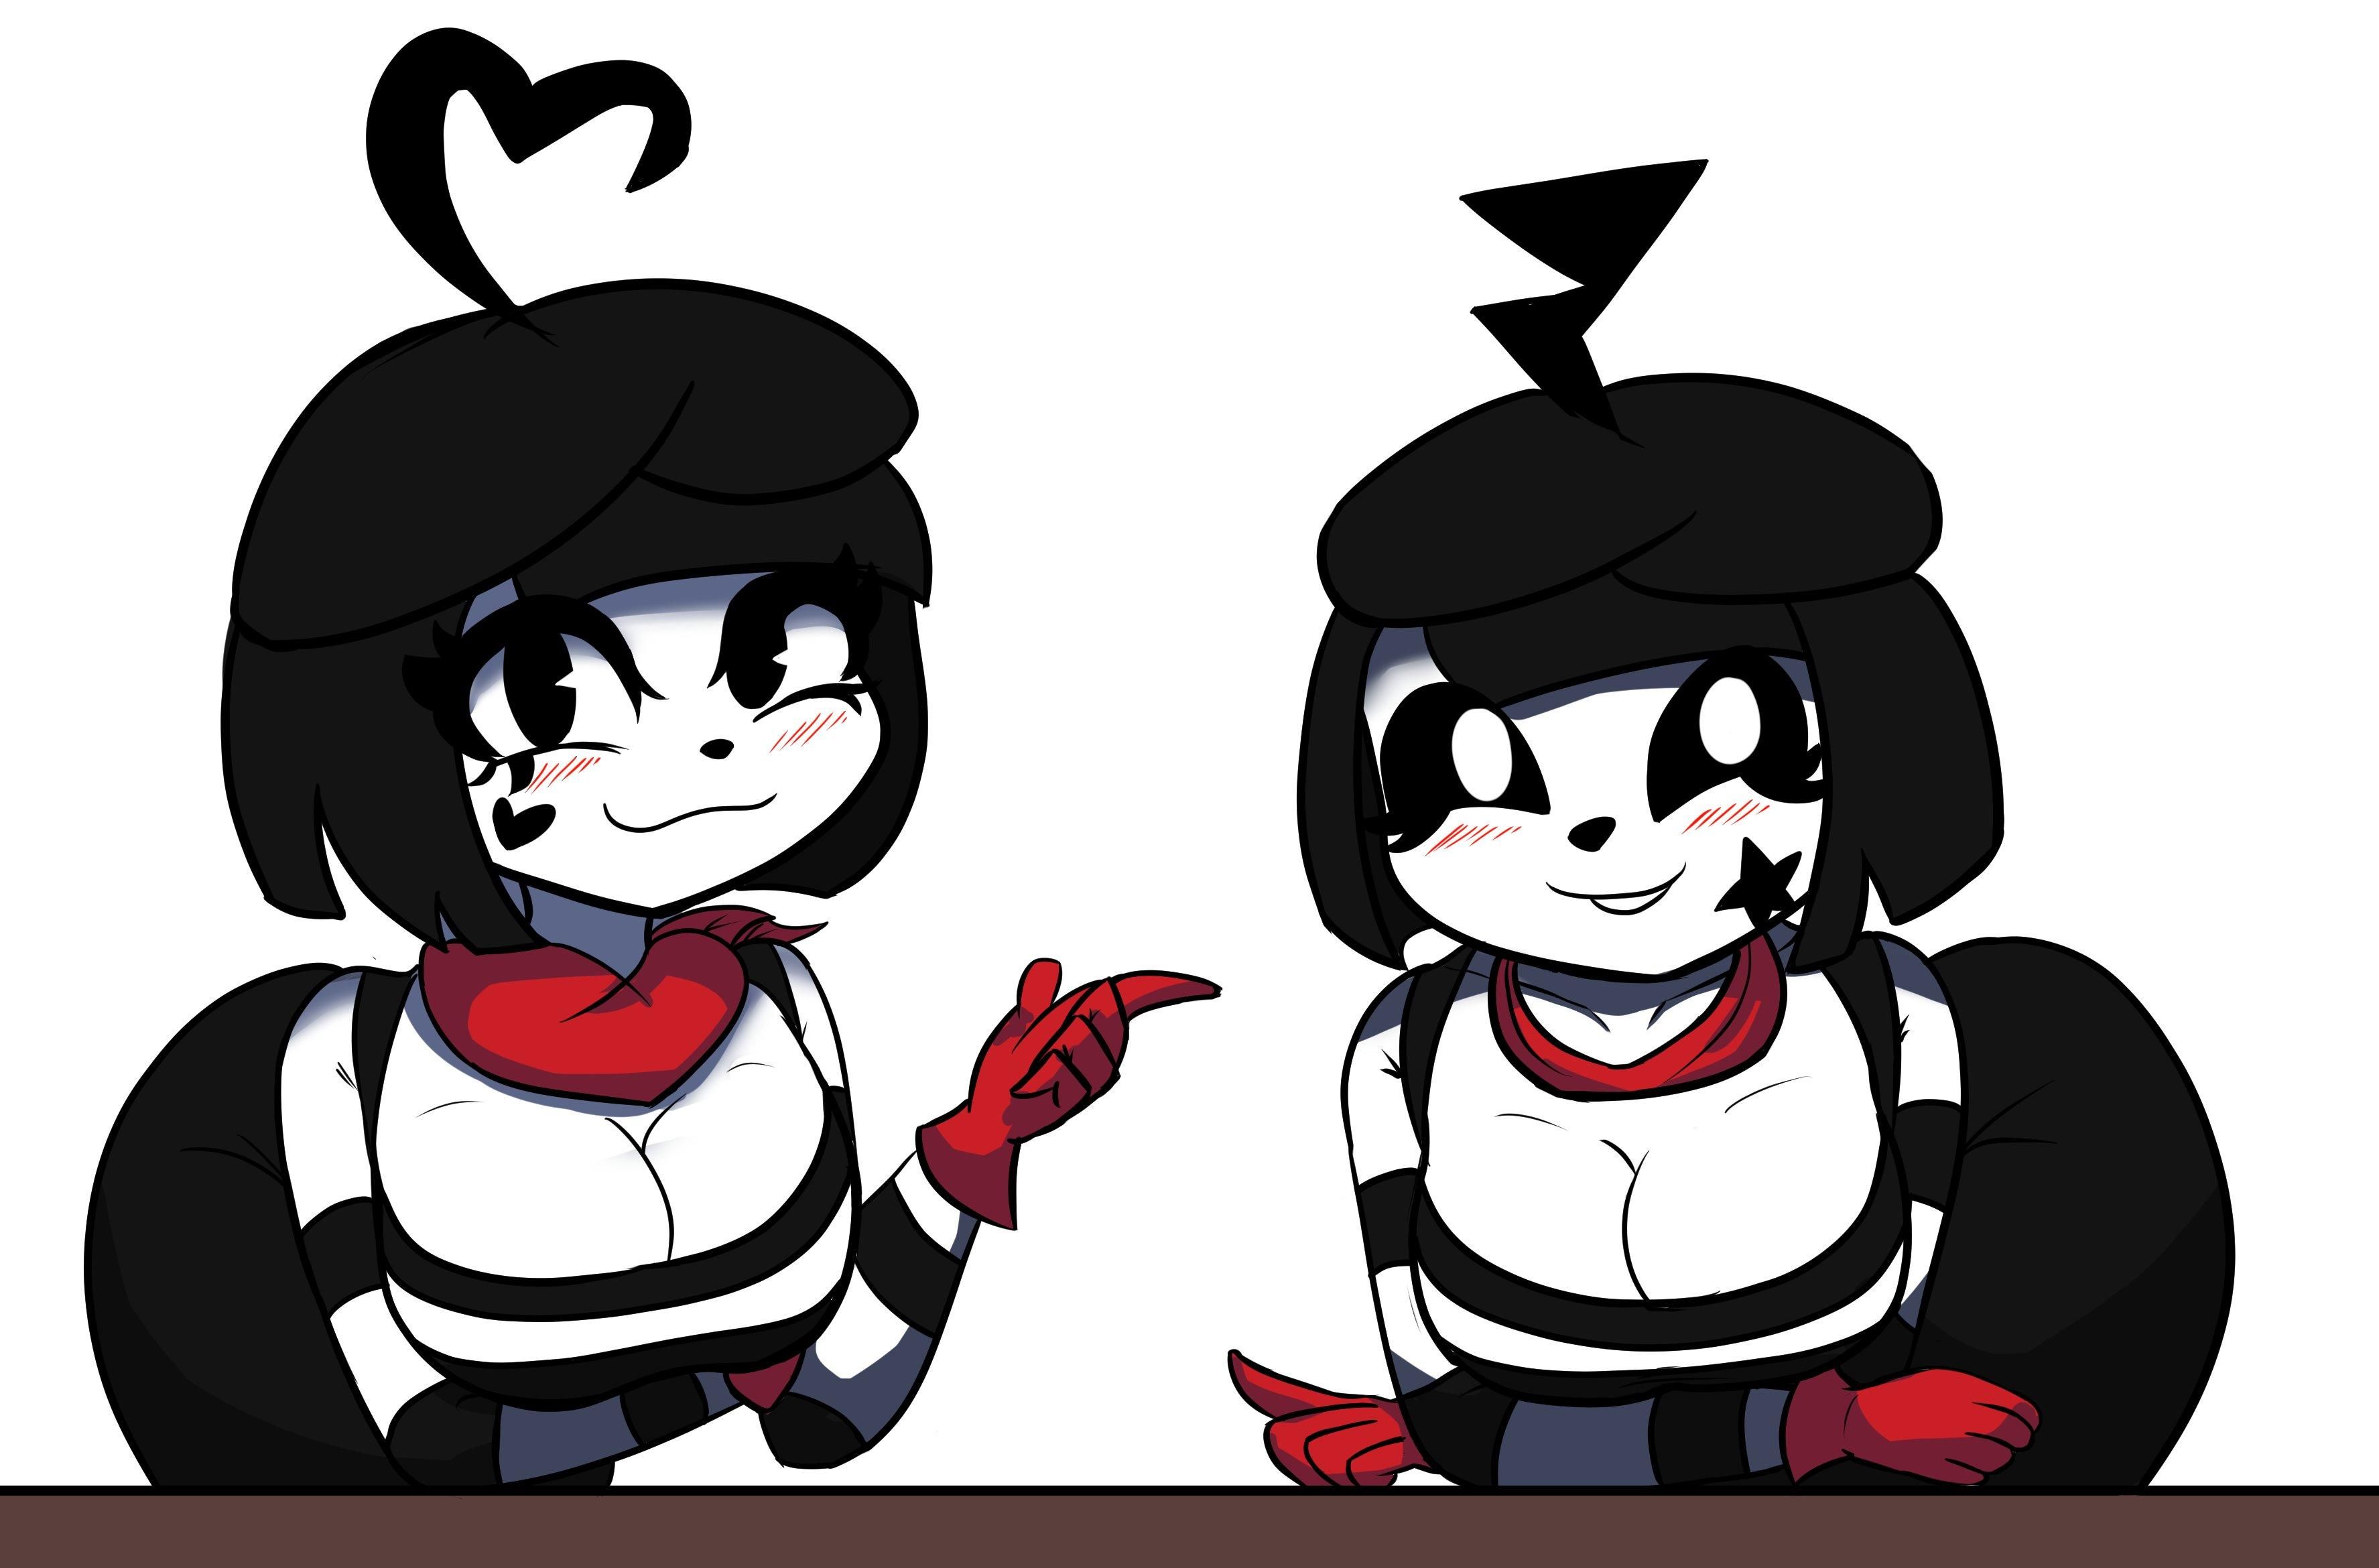 Mime and Plush by burynice on Newgrounds